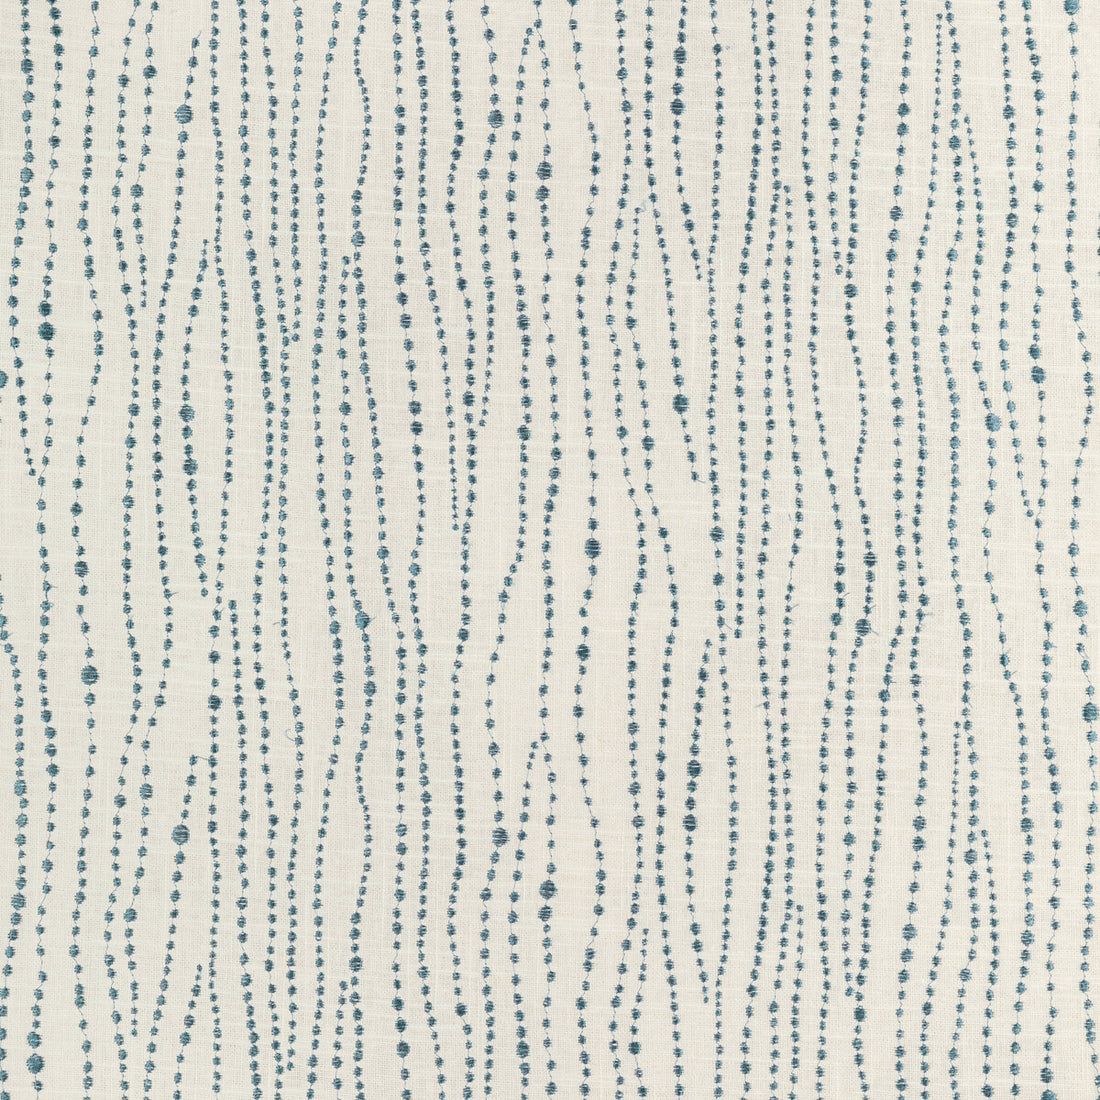 Denali fabric in indigo color - pattern 4192.5.0 - by Kravet Design in the Candice Olson collection